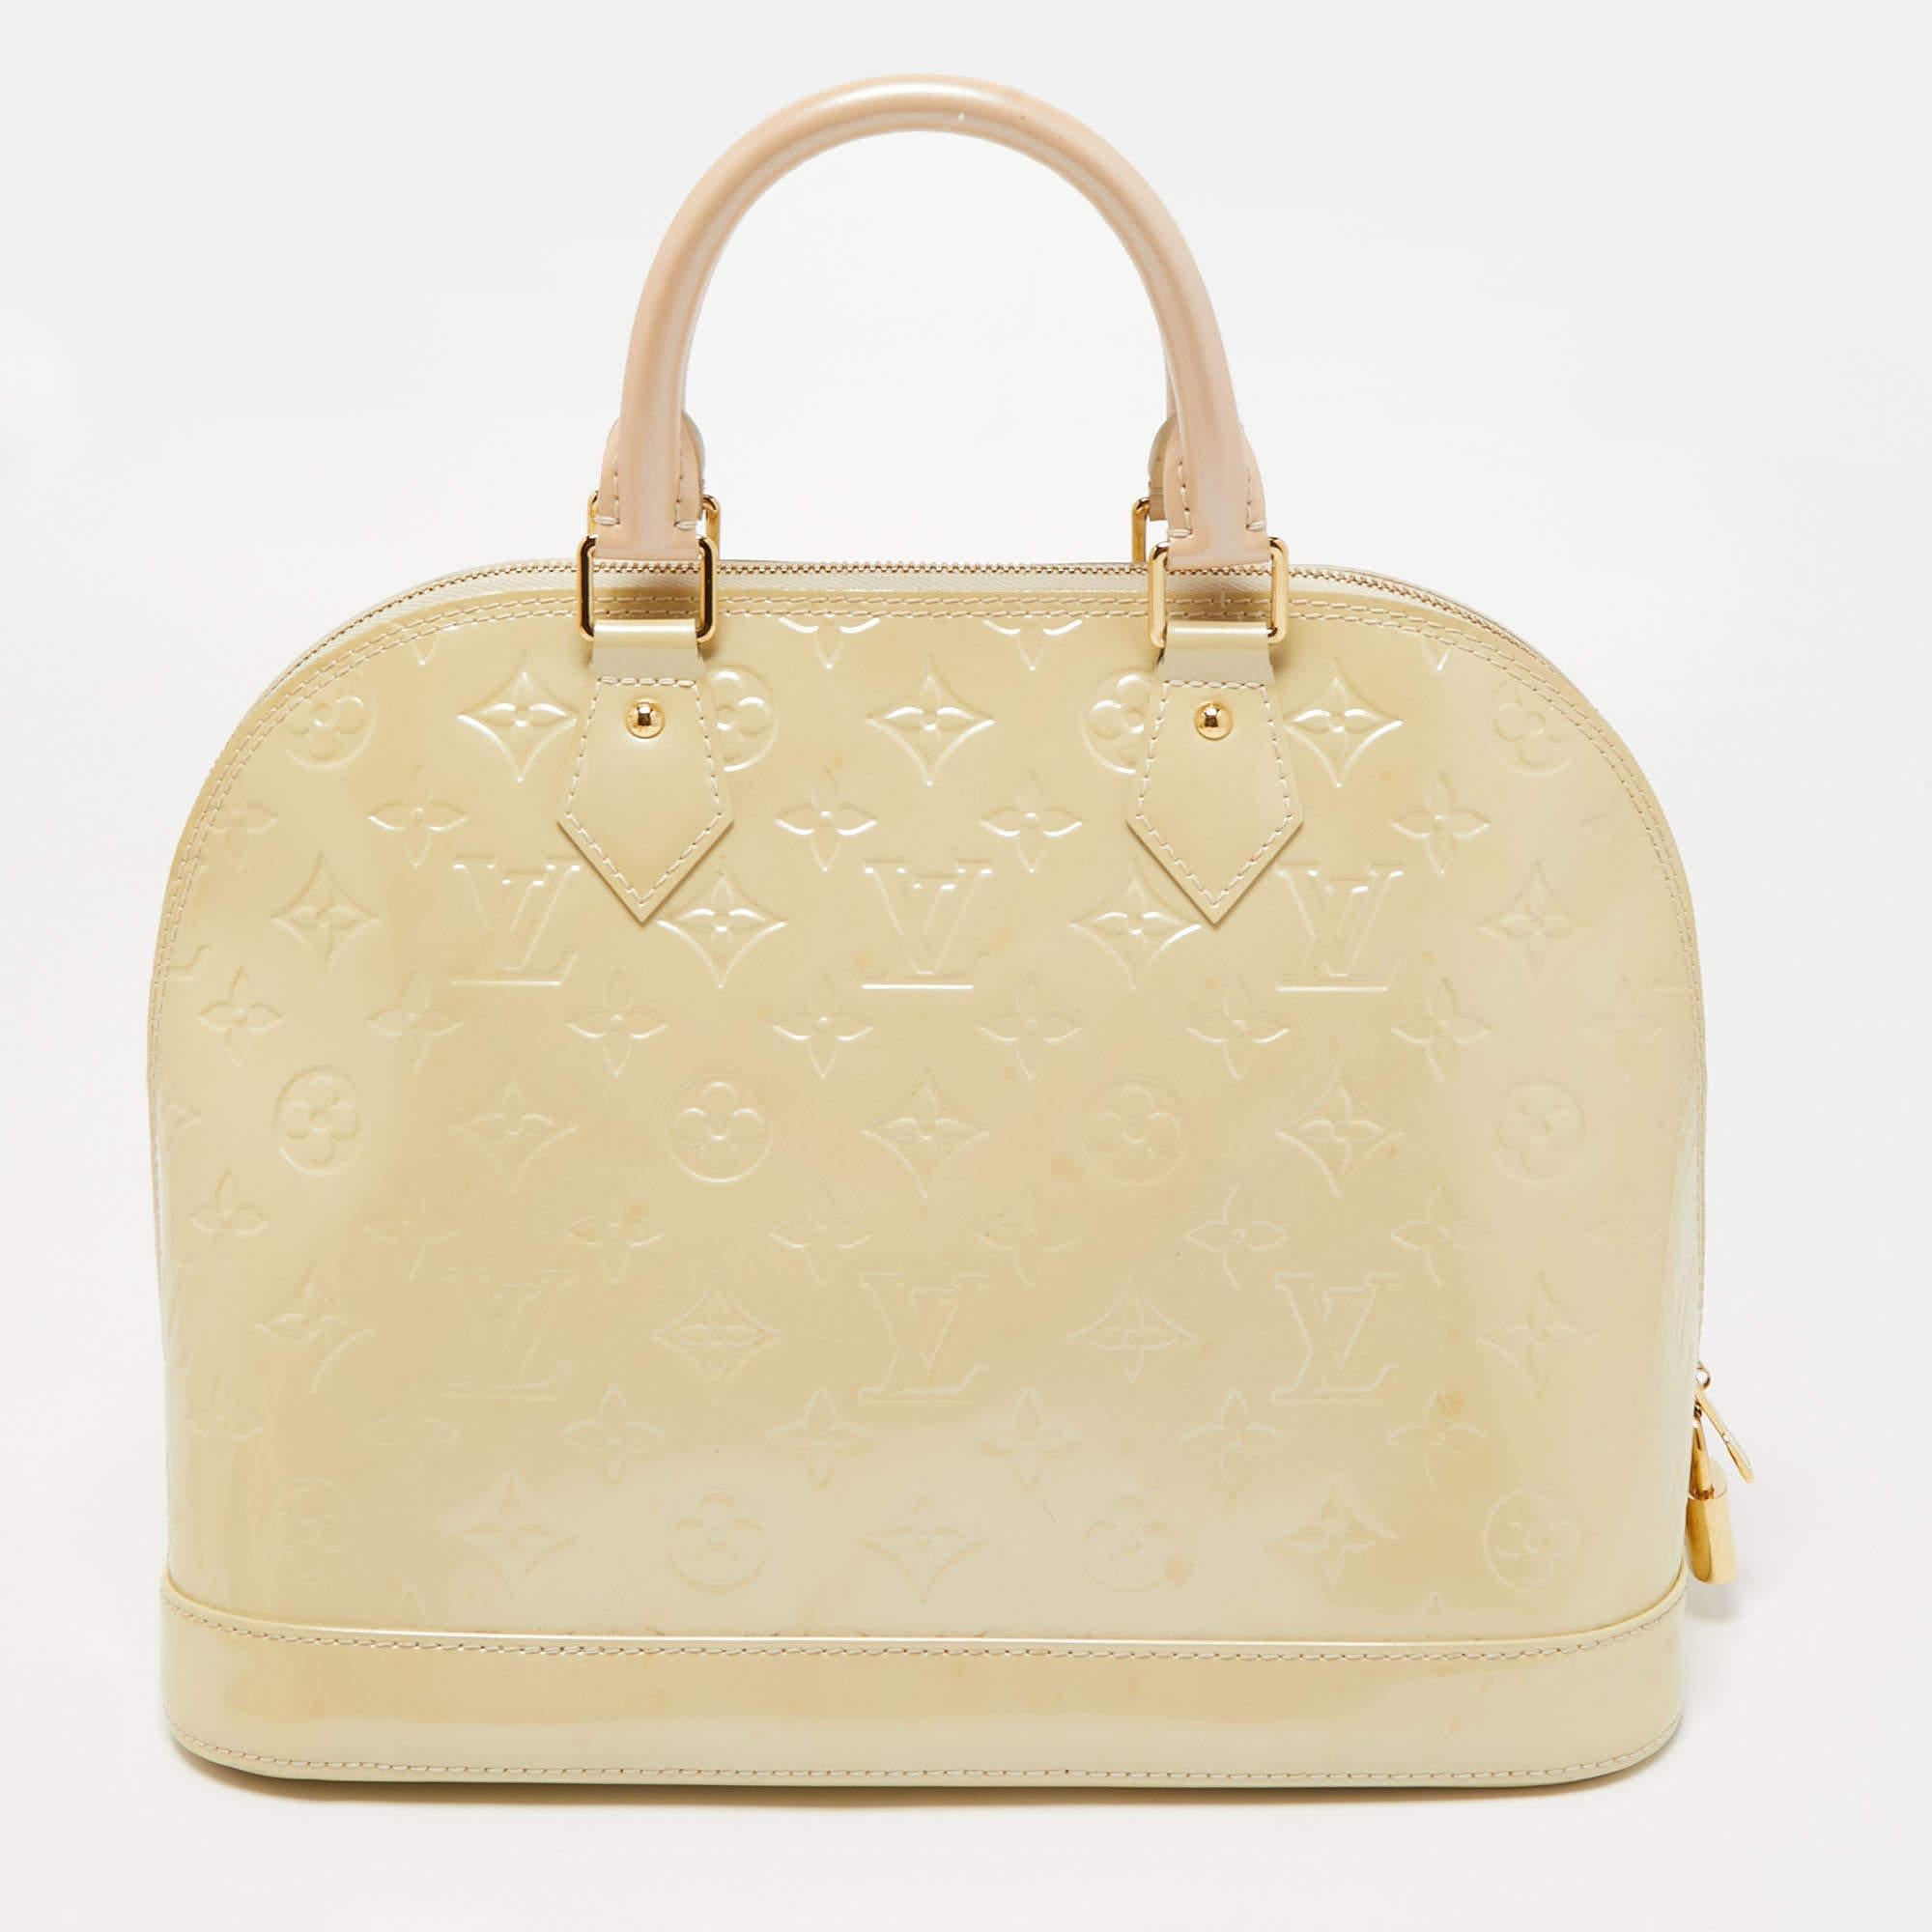 Introduced by Gaston-Louis Vuitton in 1934, the Louis Vuitton Alma is defined by elegant curves and notable features. From one of the most iconic collections of Louis Vuitton, this PM bag is imbued with exquisite craftsmanship and historic details.